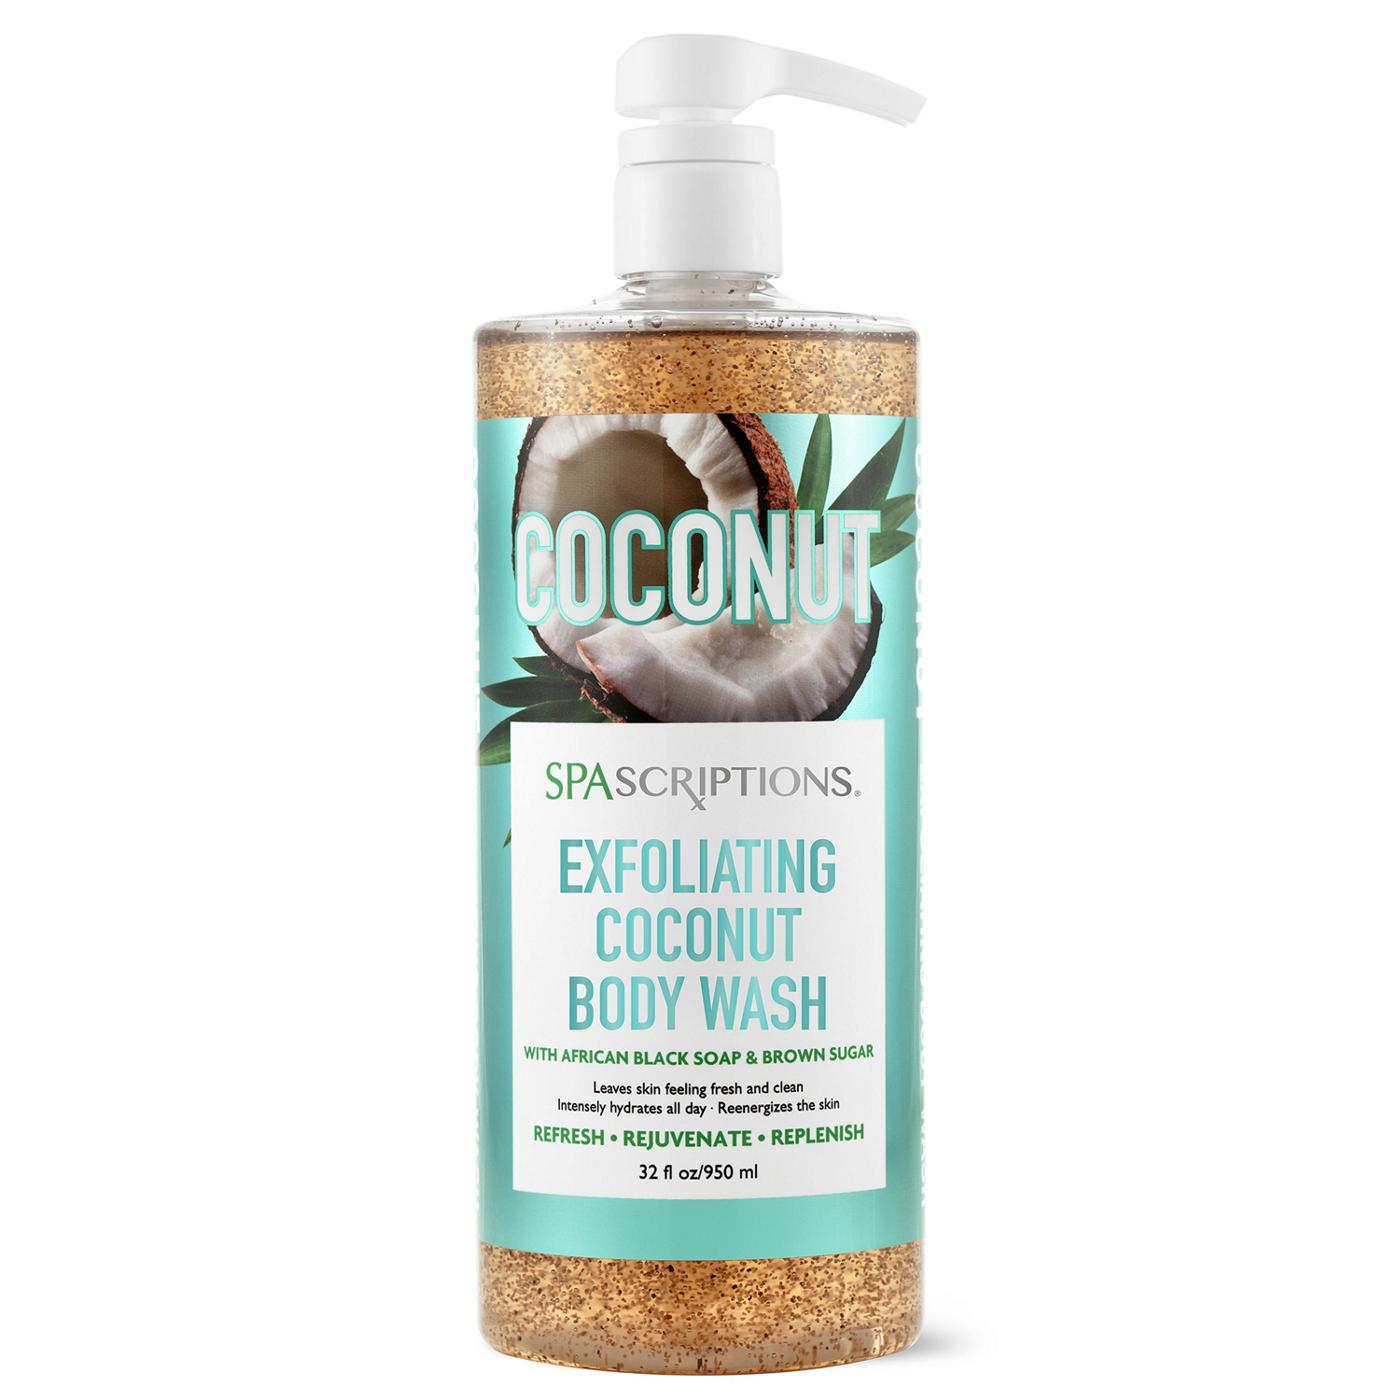 SpaScriptions Exfoliating Body Wash - Coconut; image 1 of 2